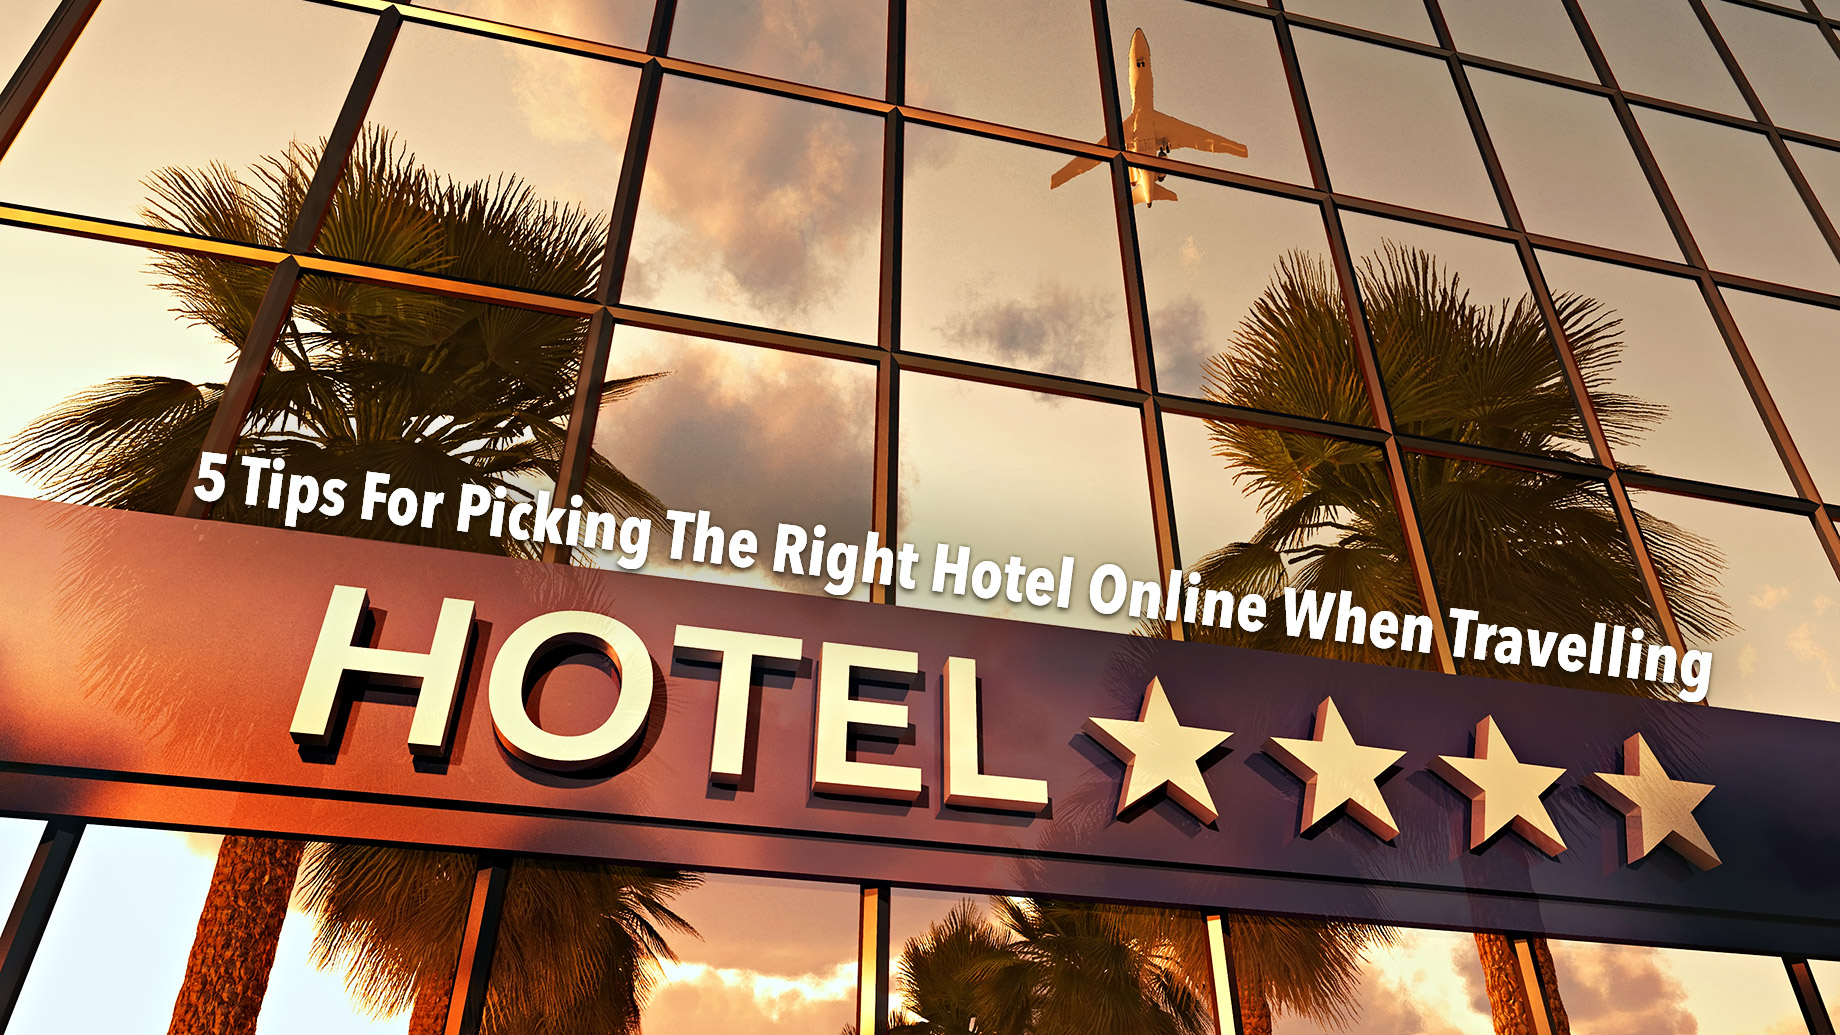 5 Tips For Picking The Right Hotel Online When Travelling